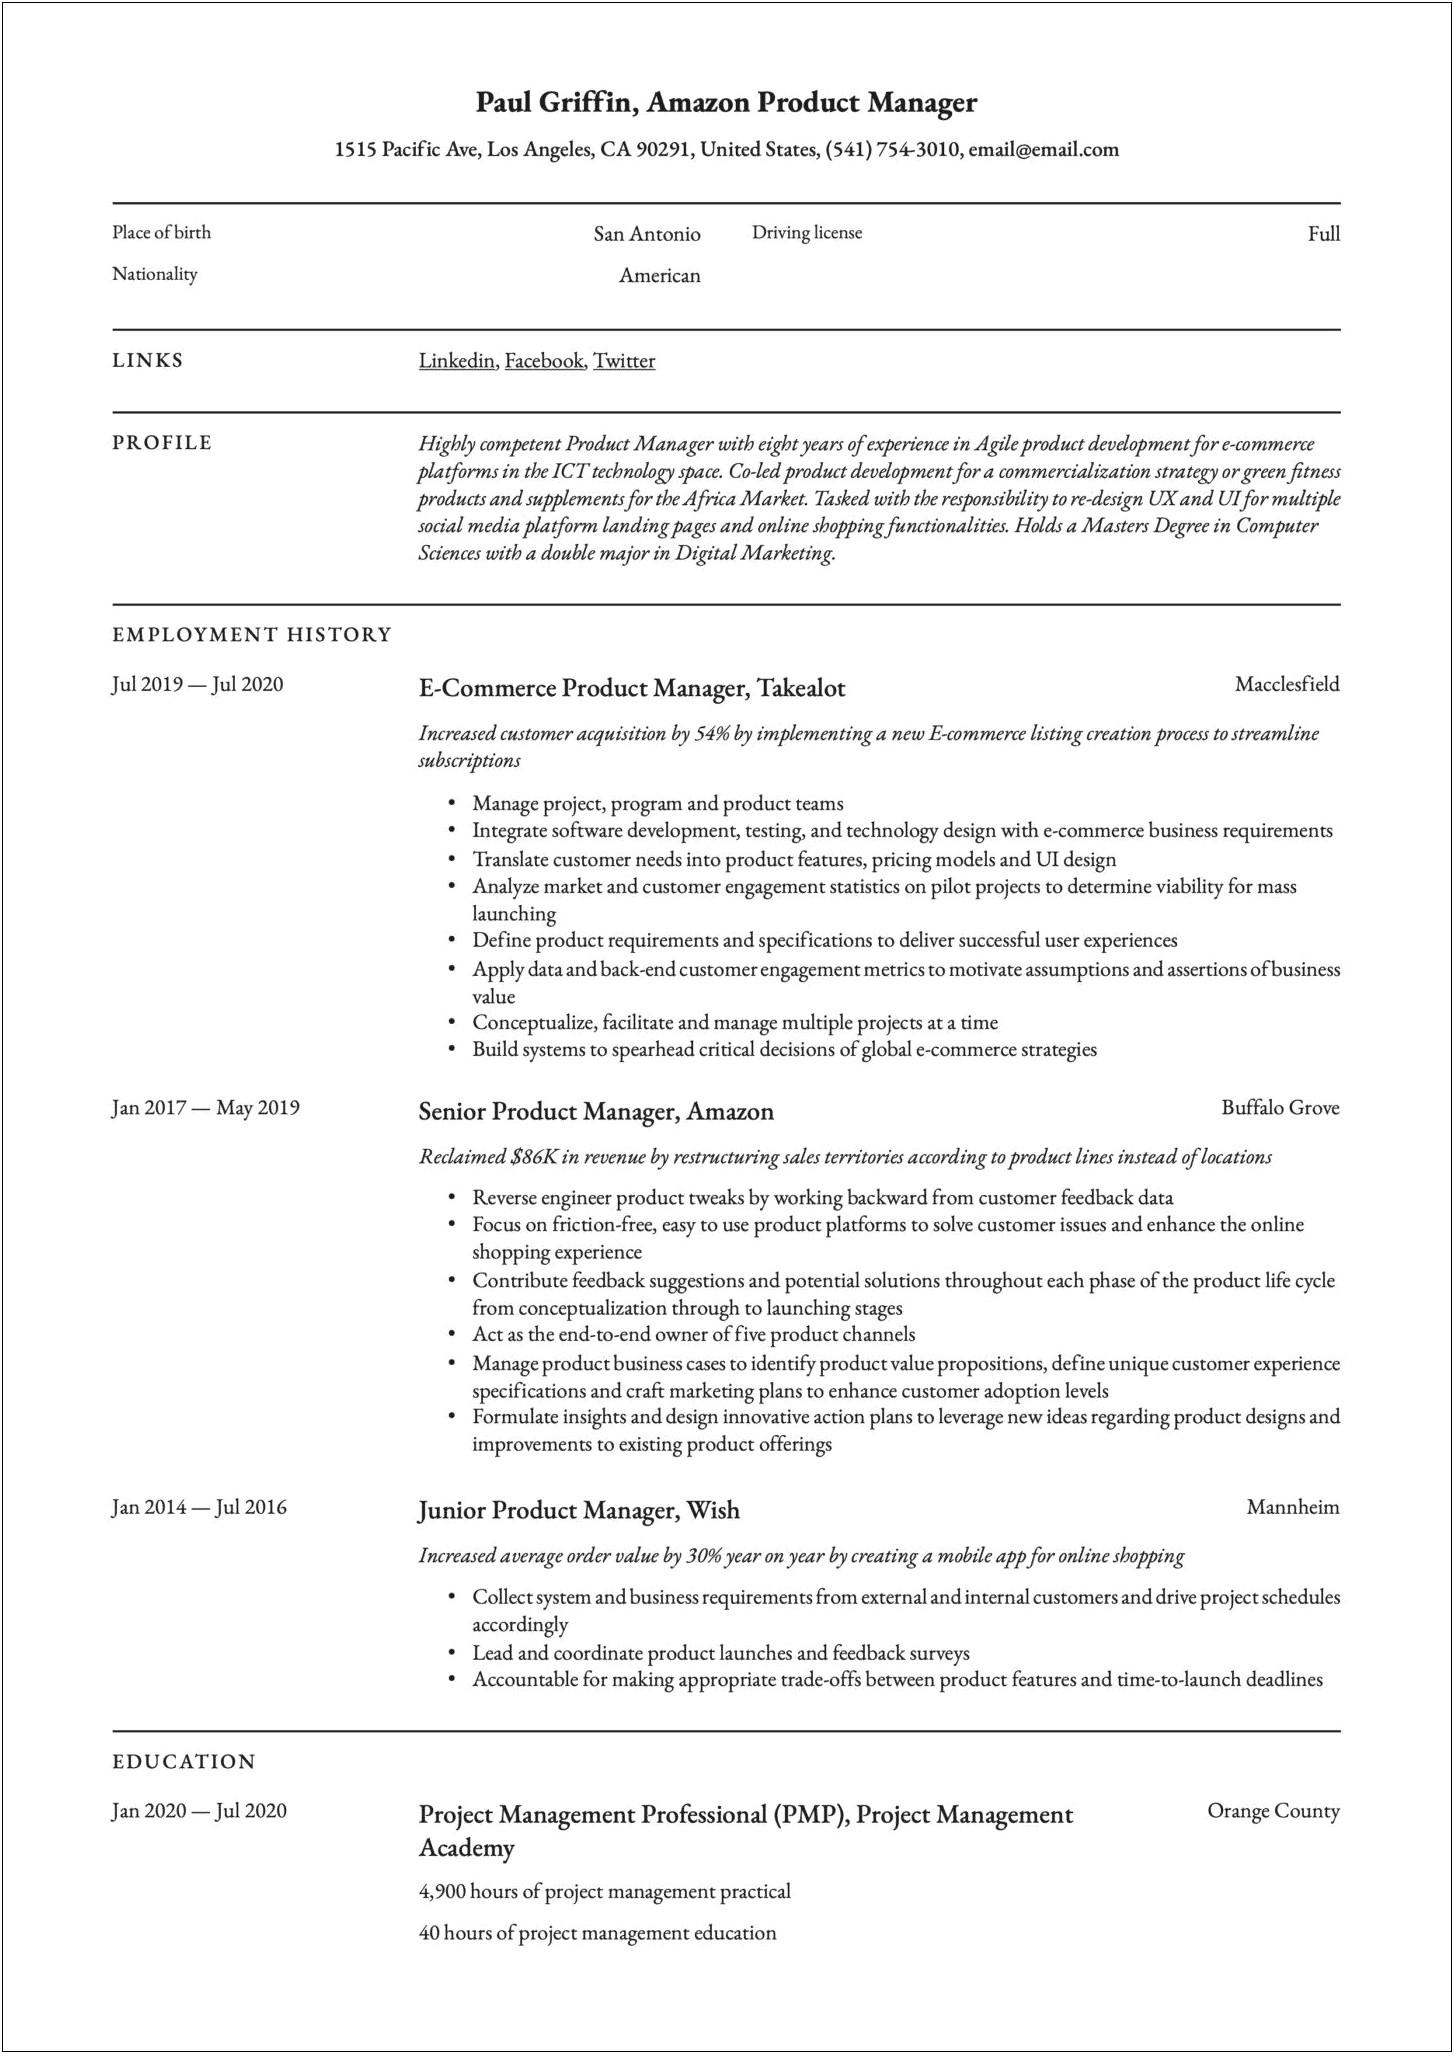 Resume Objective For Product Manager